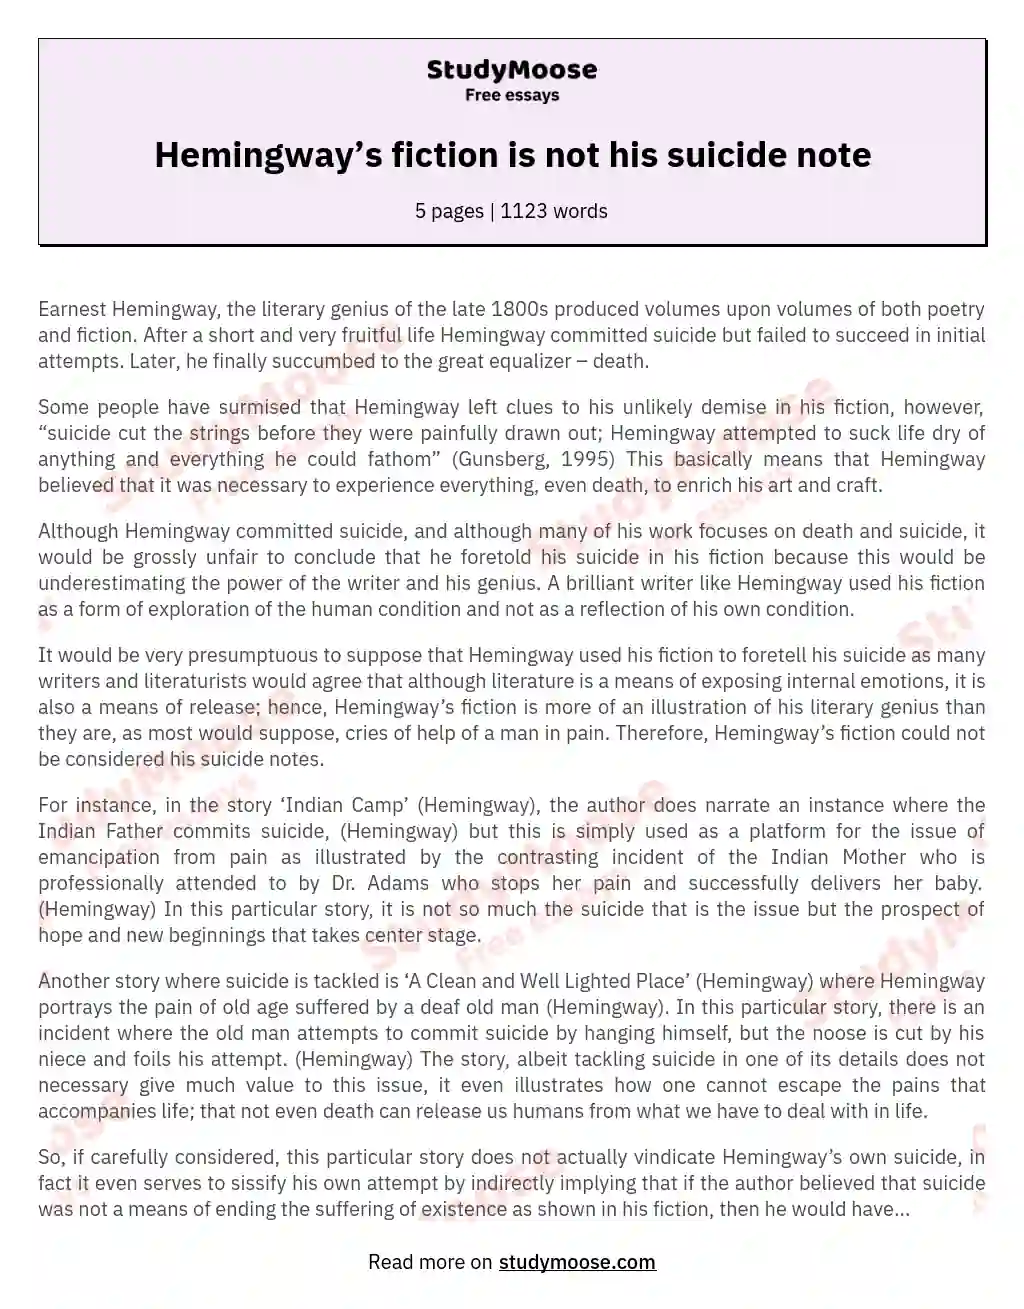 Hemingway’s fiction is not his suicide note essay